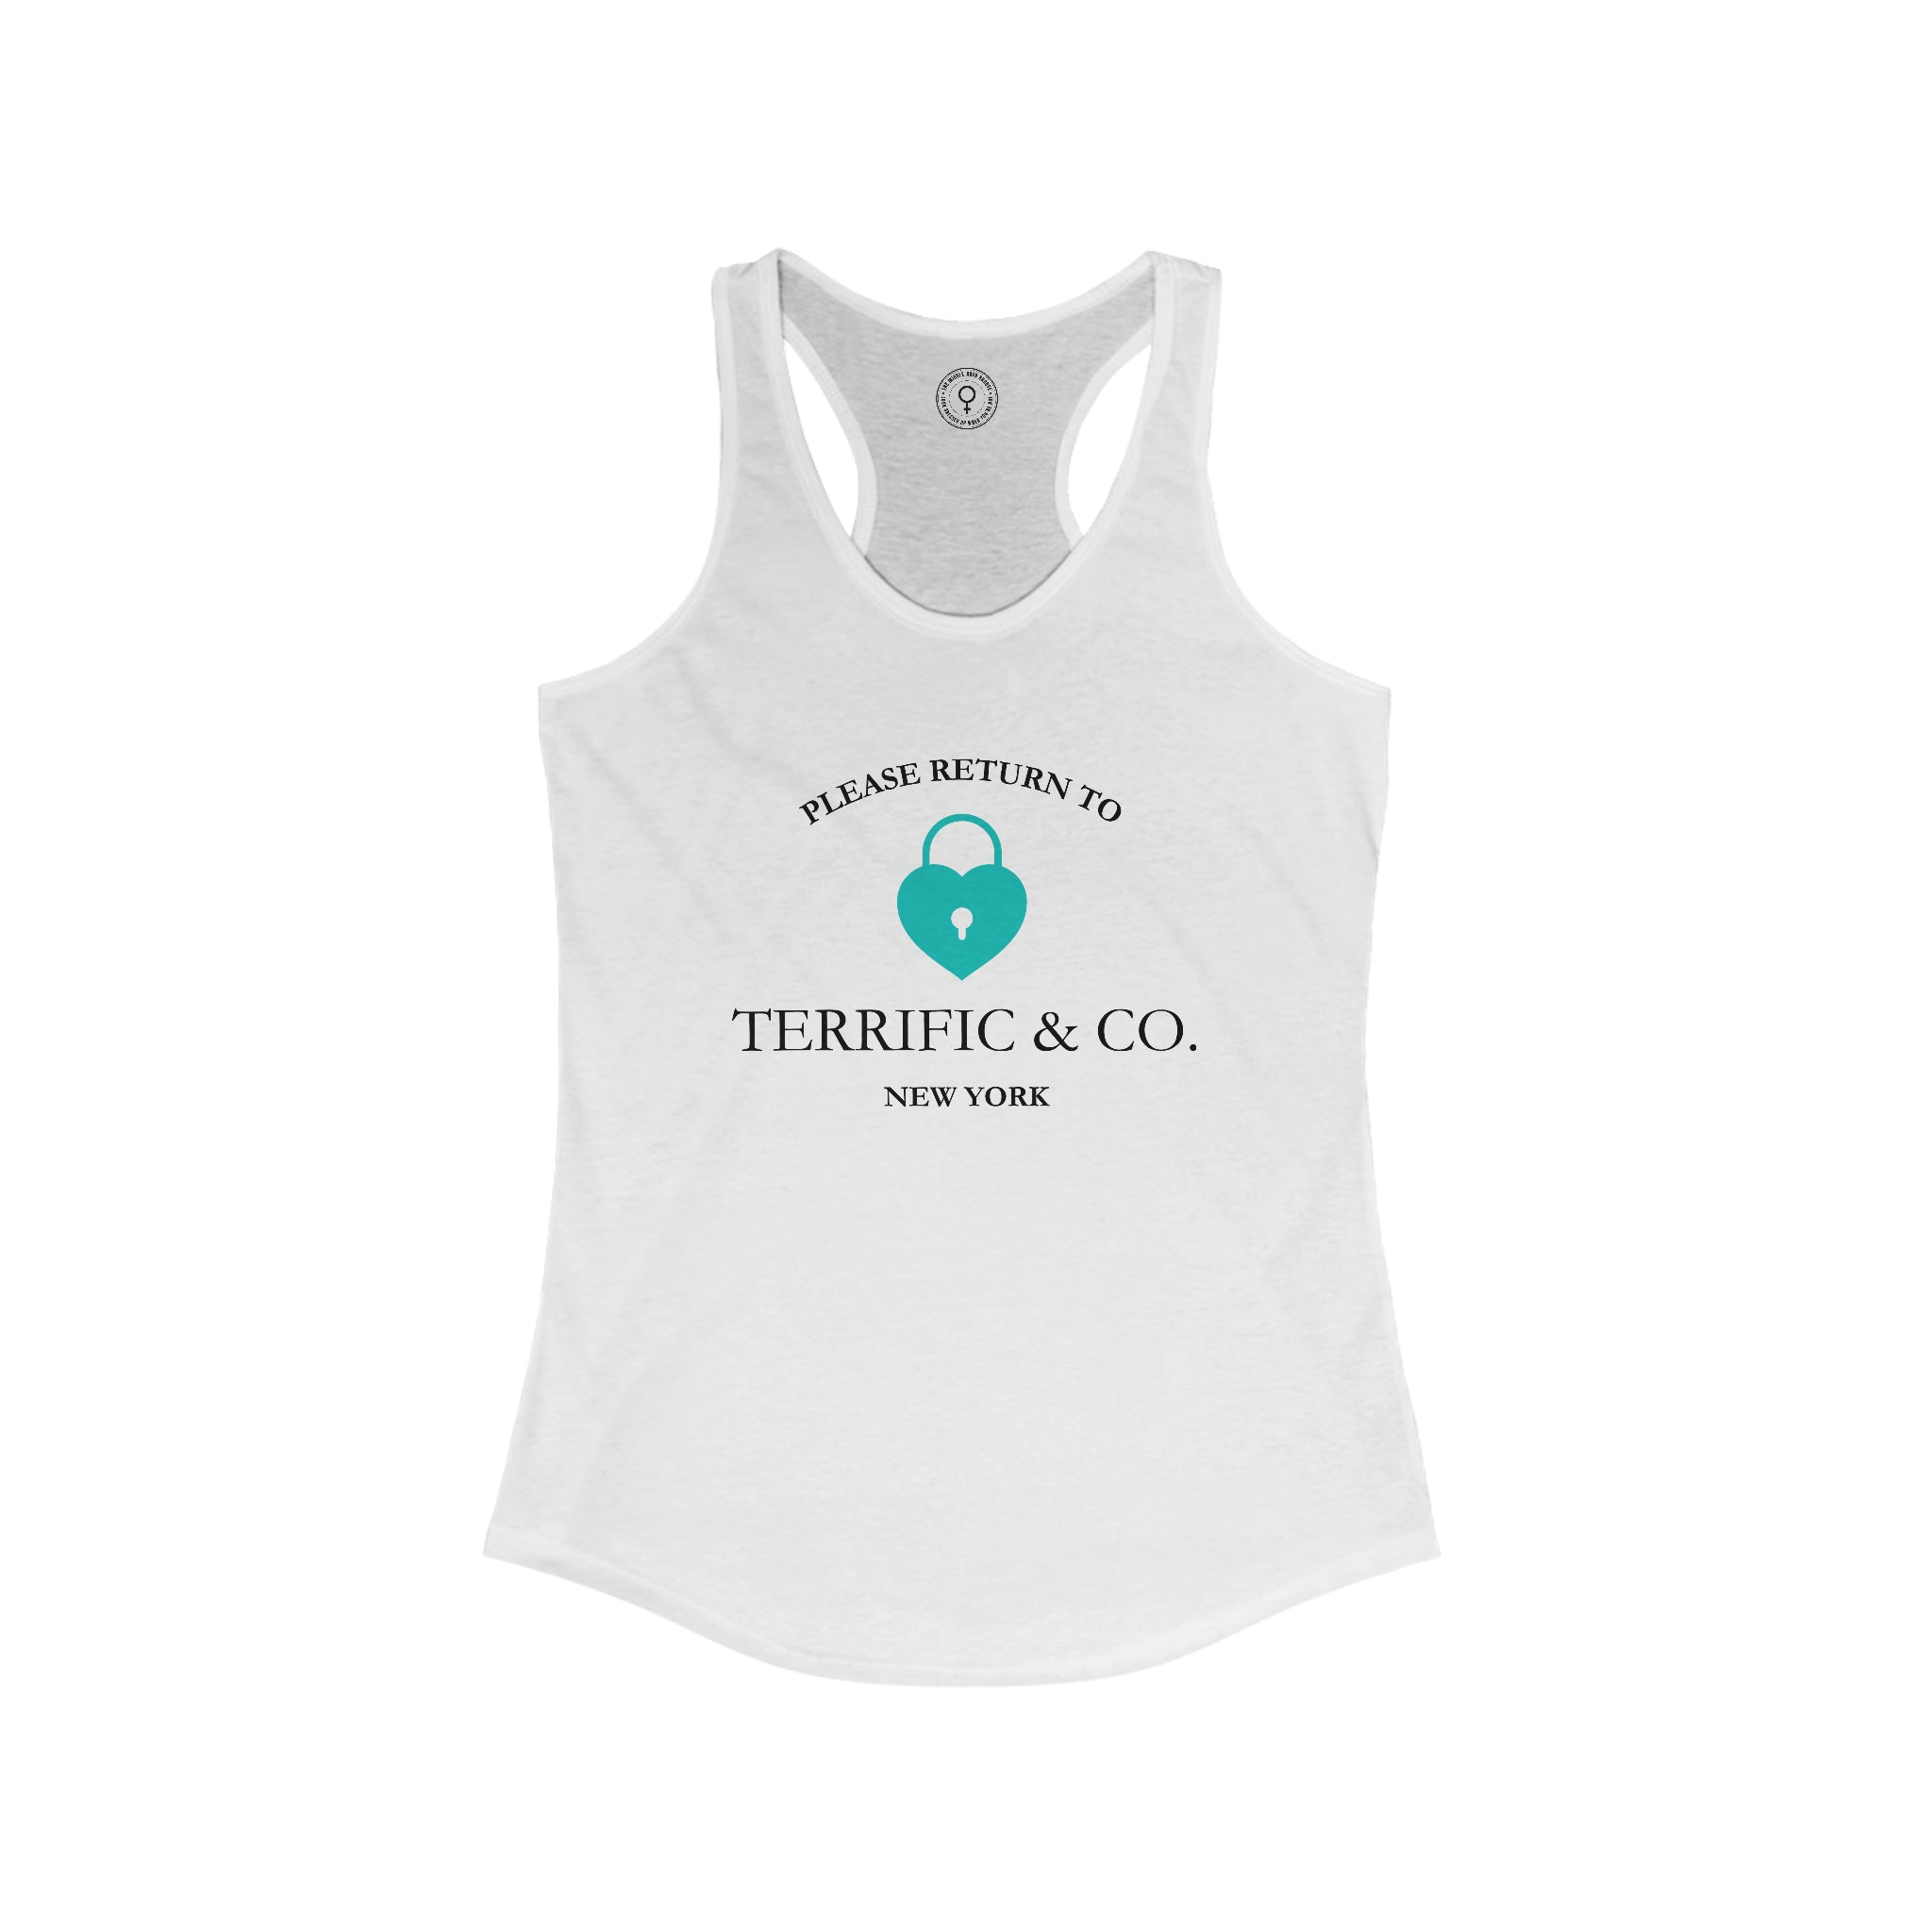 Please Return to Terrific & Co. (Lock) Women's Ideal Racerback Tank Tank Top 2XL-Solid-White The Middle Aged Groove